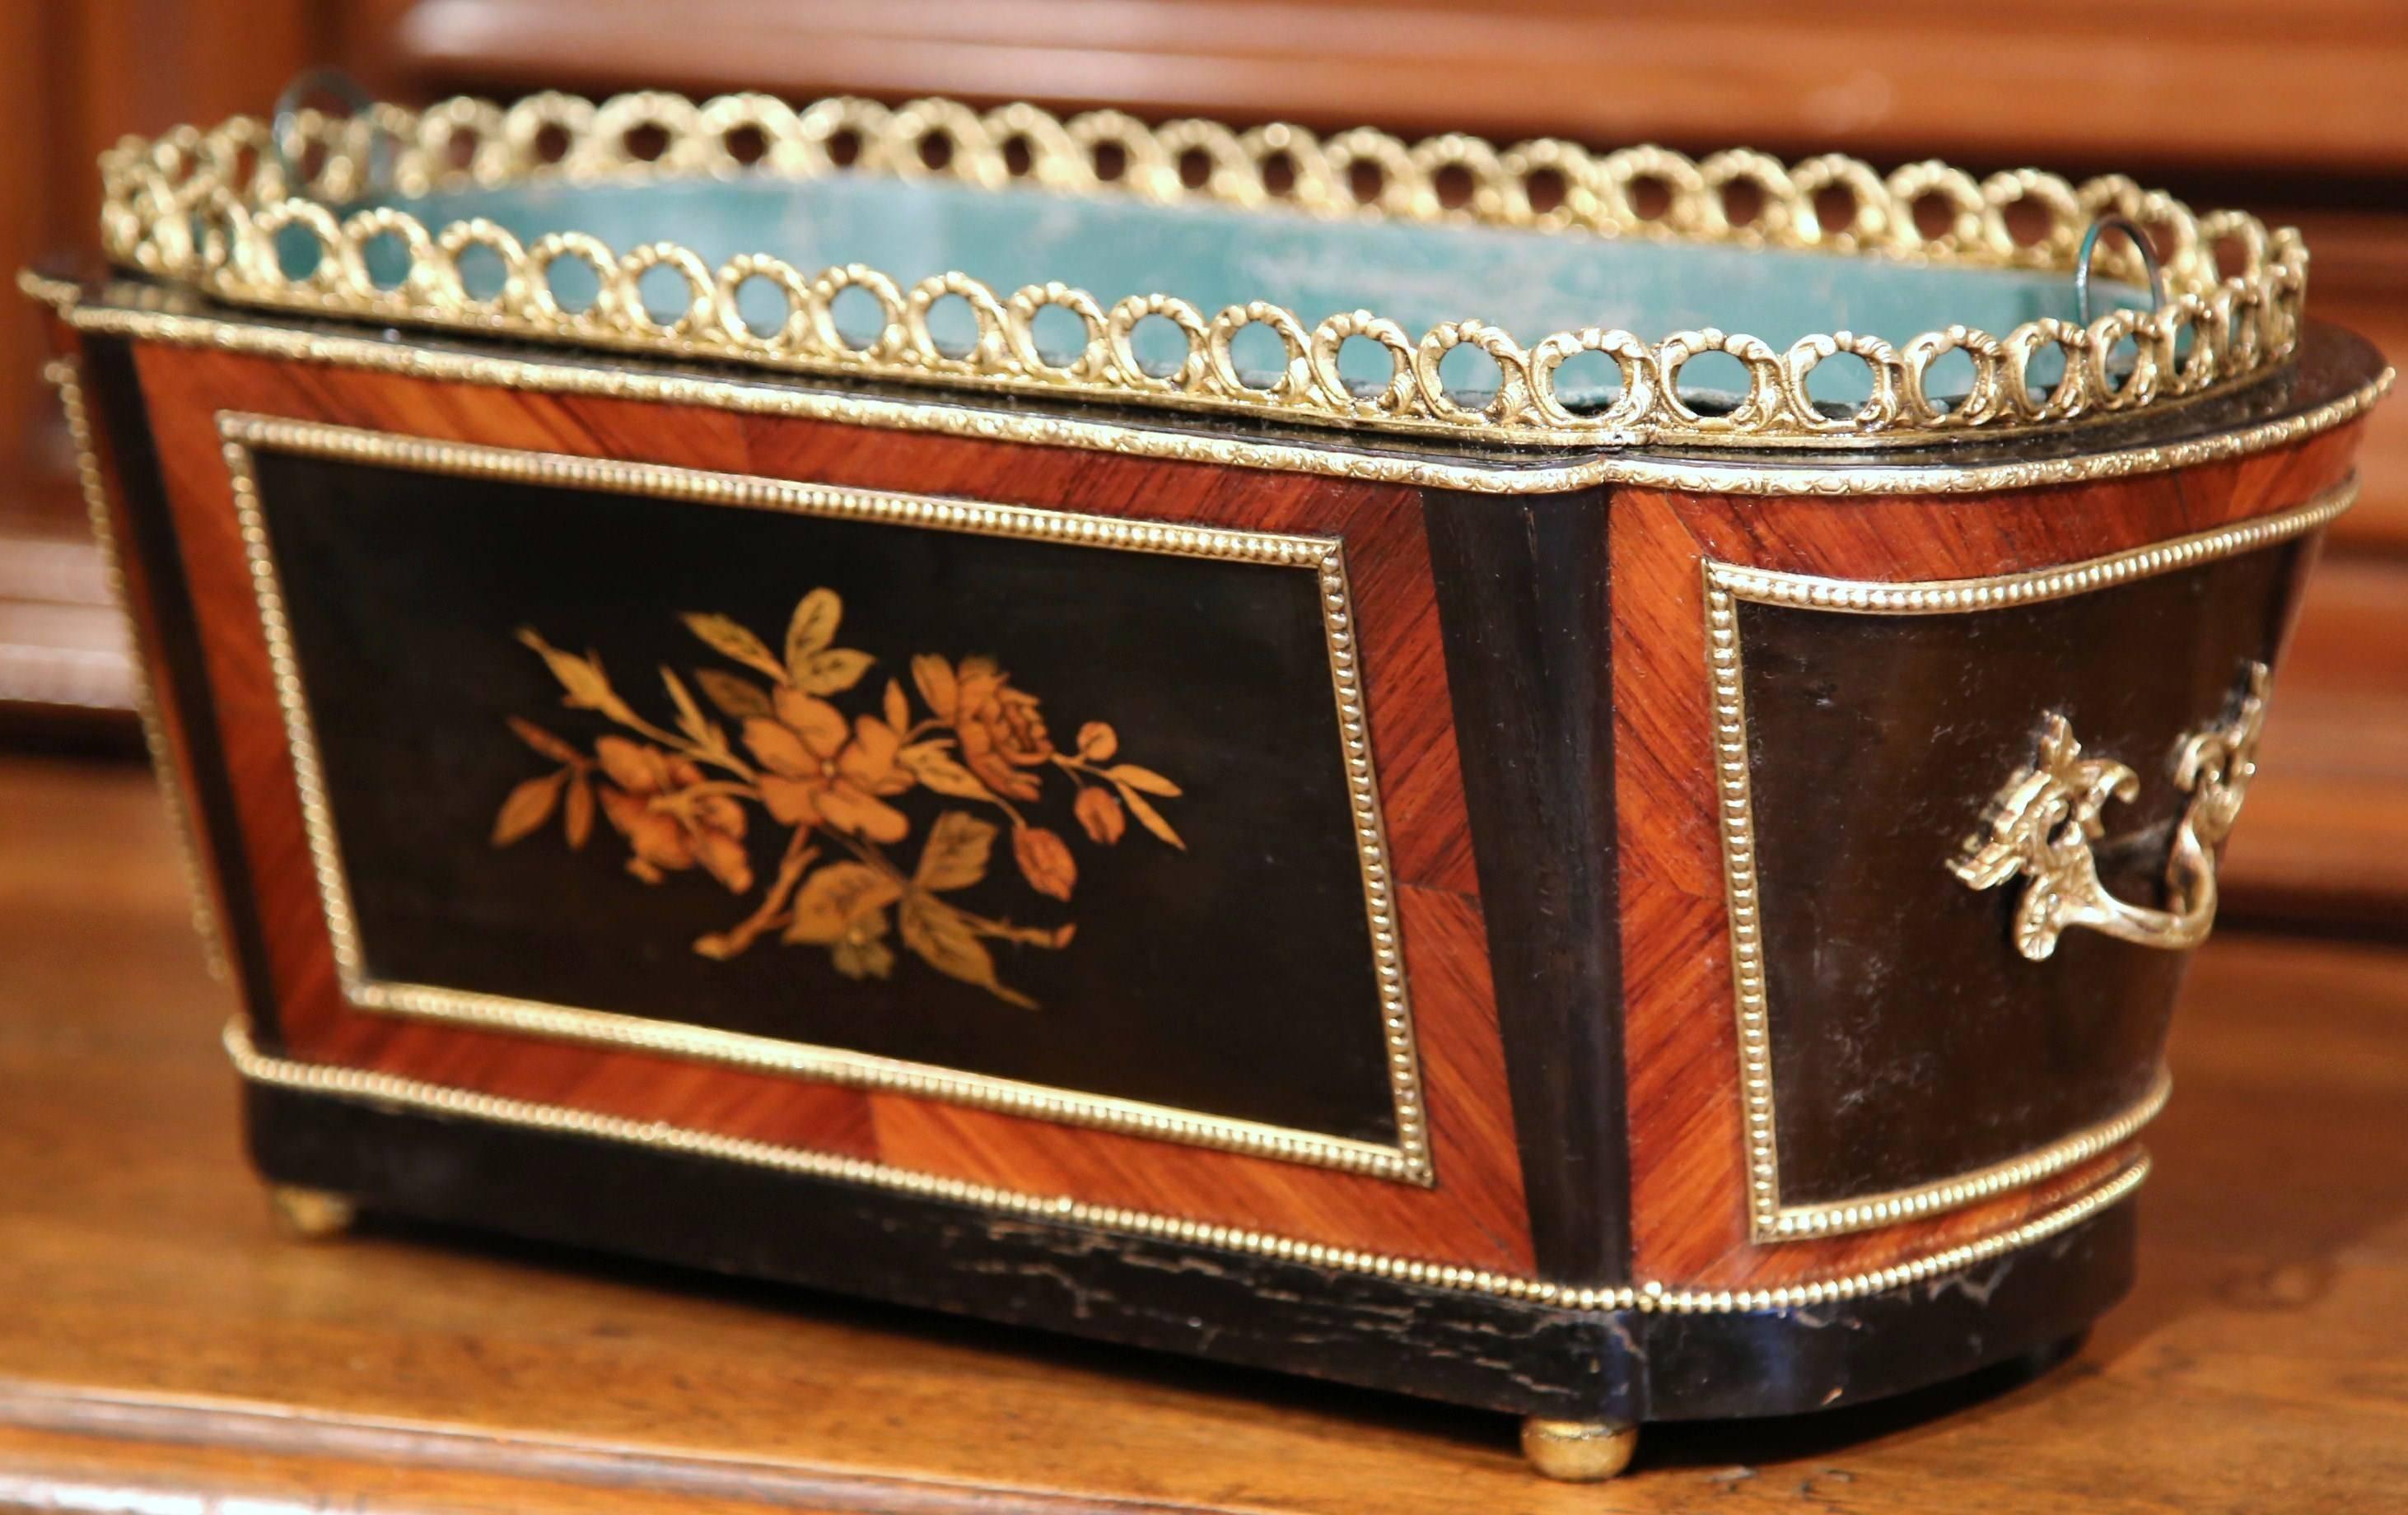 This elegant oval fruitwood planter was crafted in Paris, France, circa 1870. The antique, rosewood and ebony jardinière sits on four round feet; it features intricate marquetry and parquetry decor including colorful inlay floral and leaf motifs on